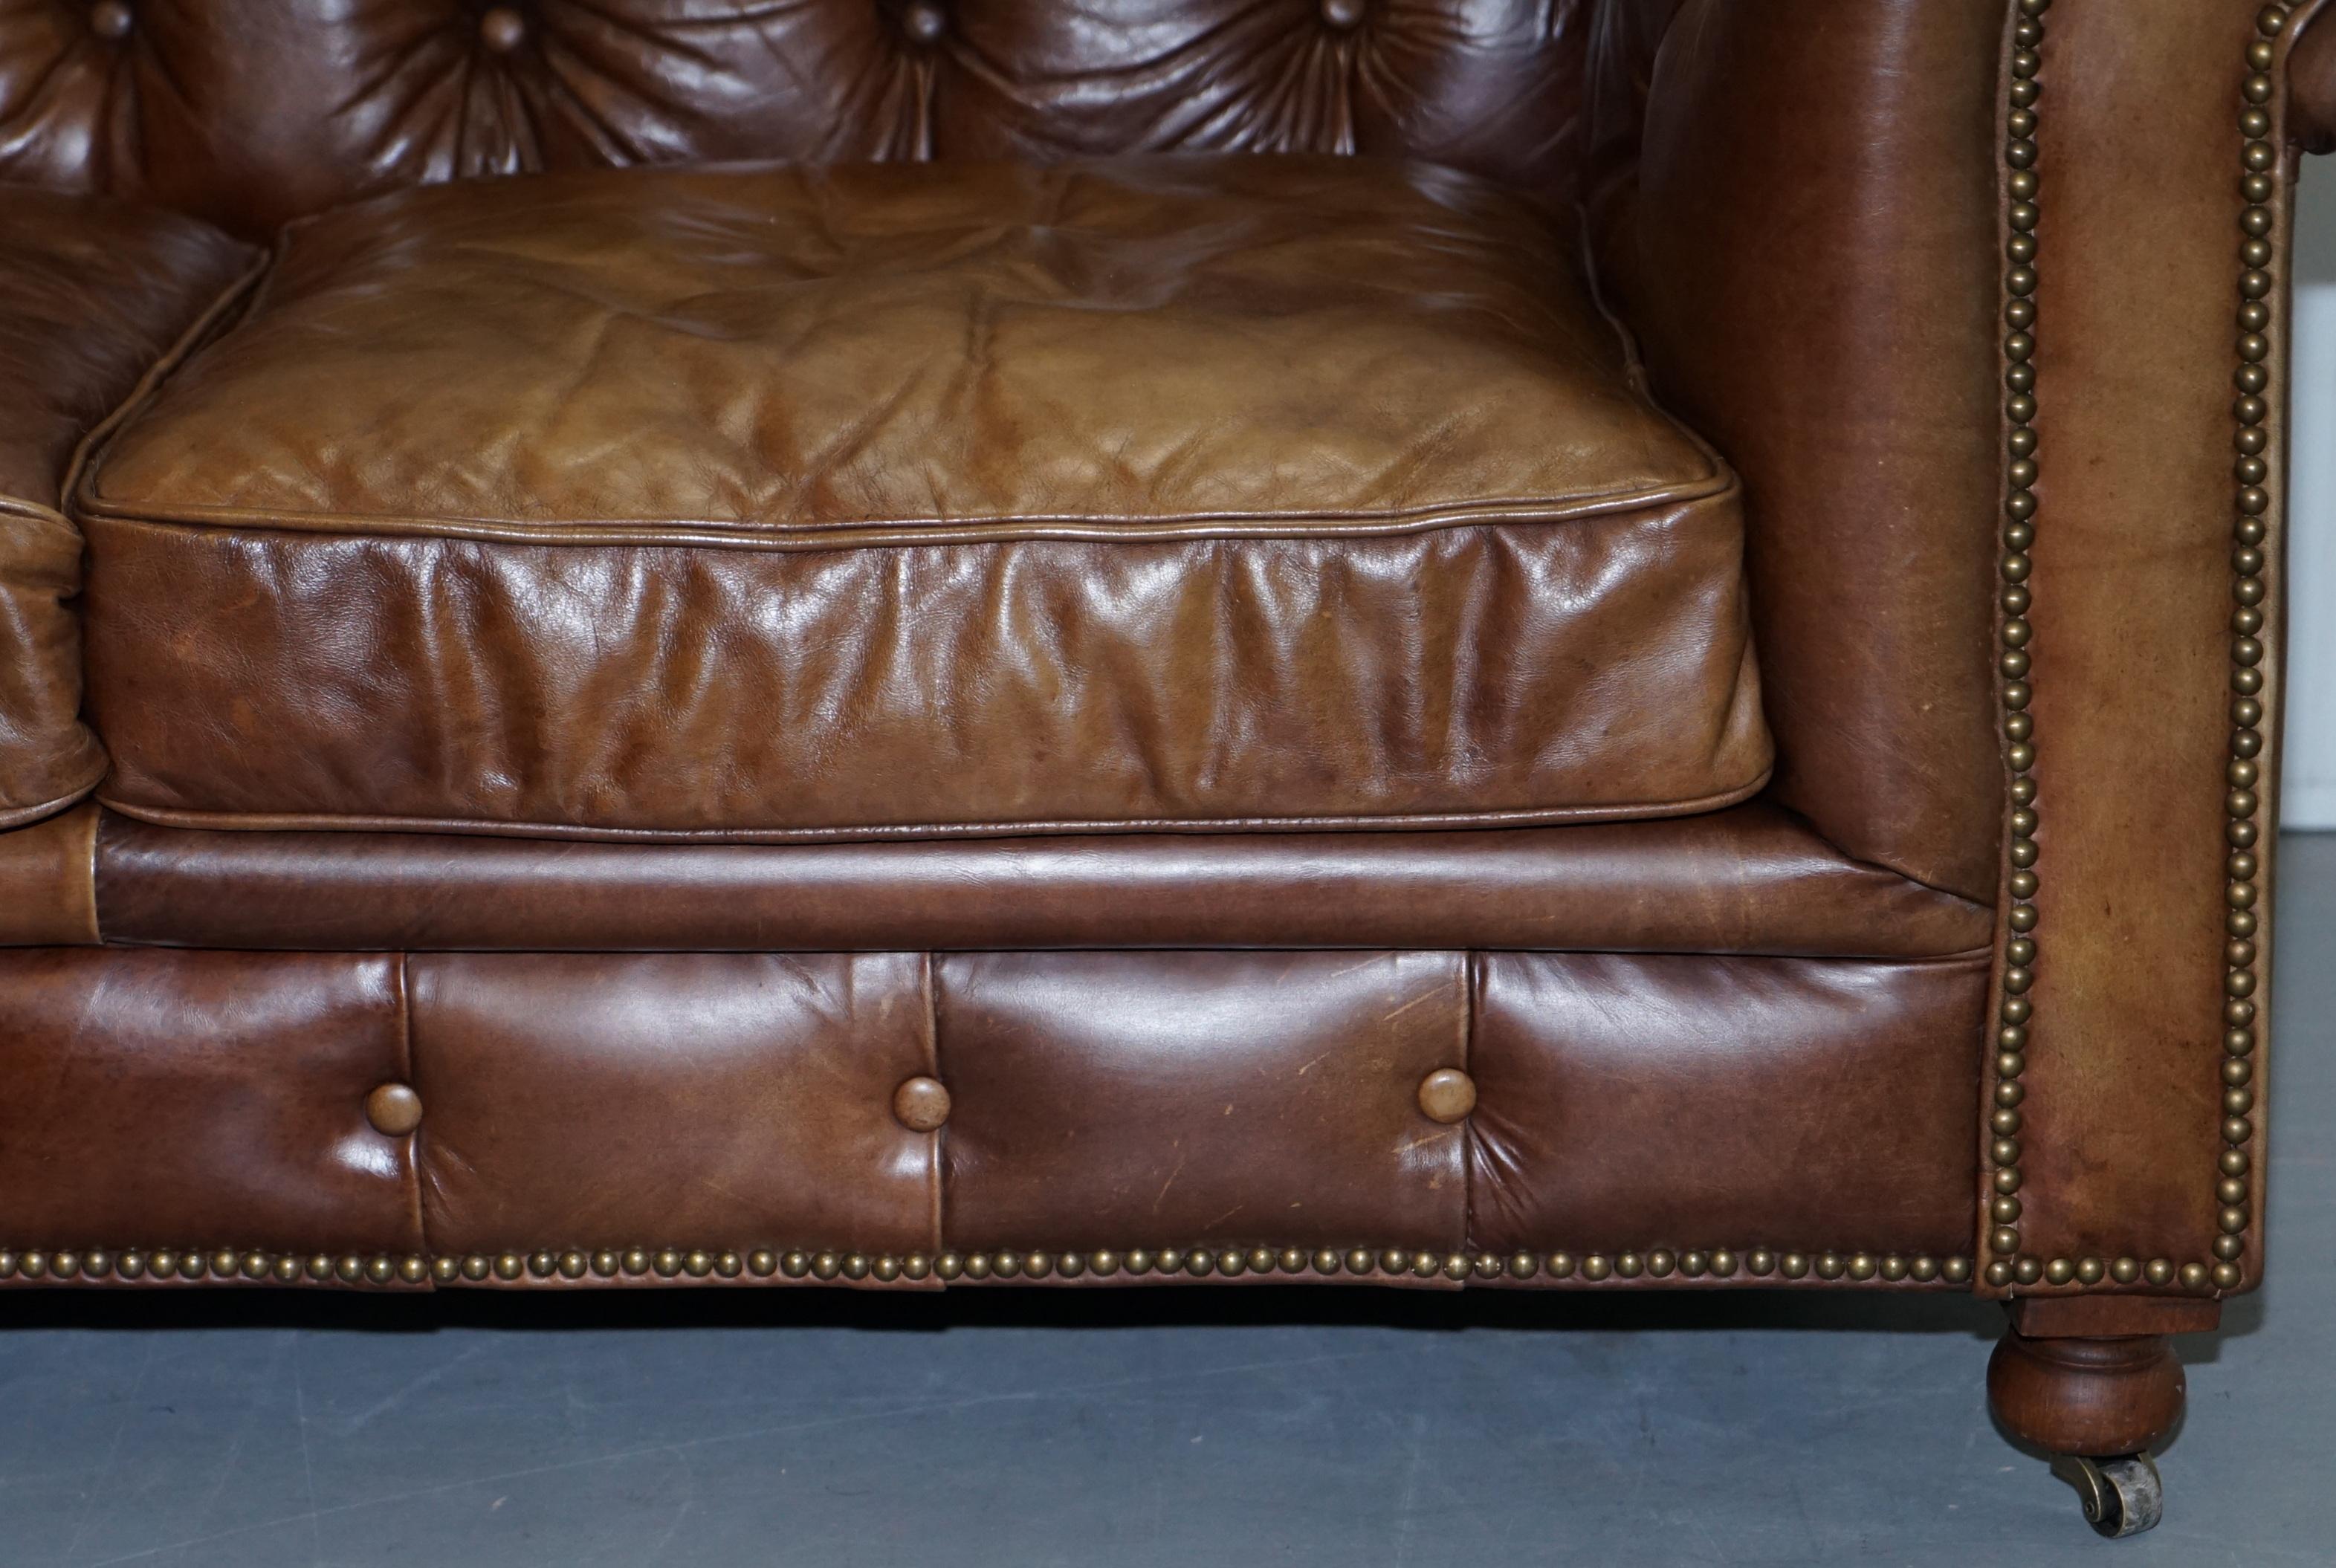 1 of 2 Timothy Oulton Halo Westminster Brown Leather Chesterfield Sofas 4